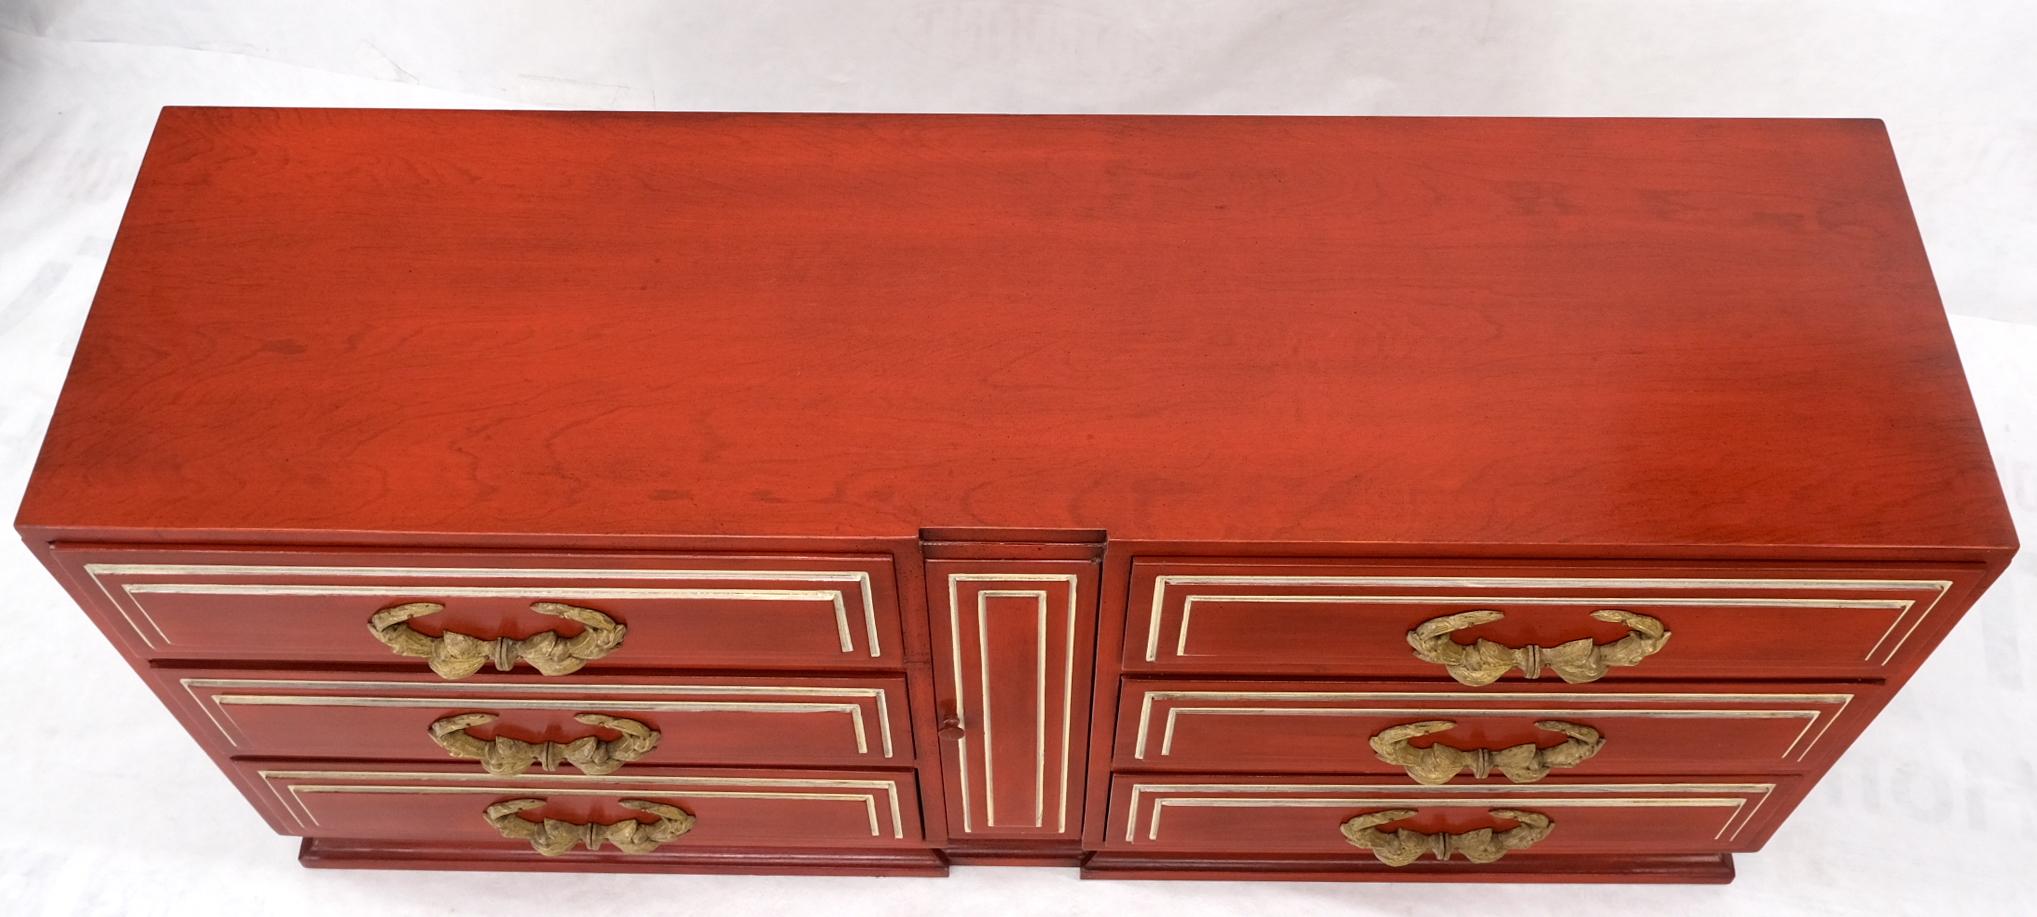 American Directoire Style Blood Tomato Red Lacquer Super Heavy Solid Brass Pulls Dresser For Sale